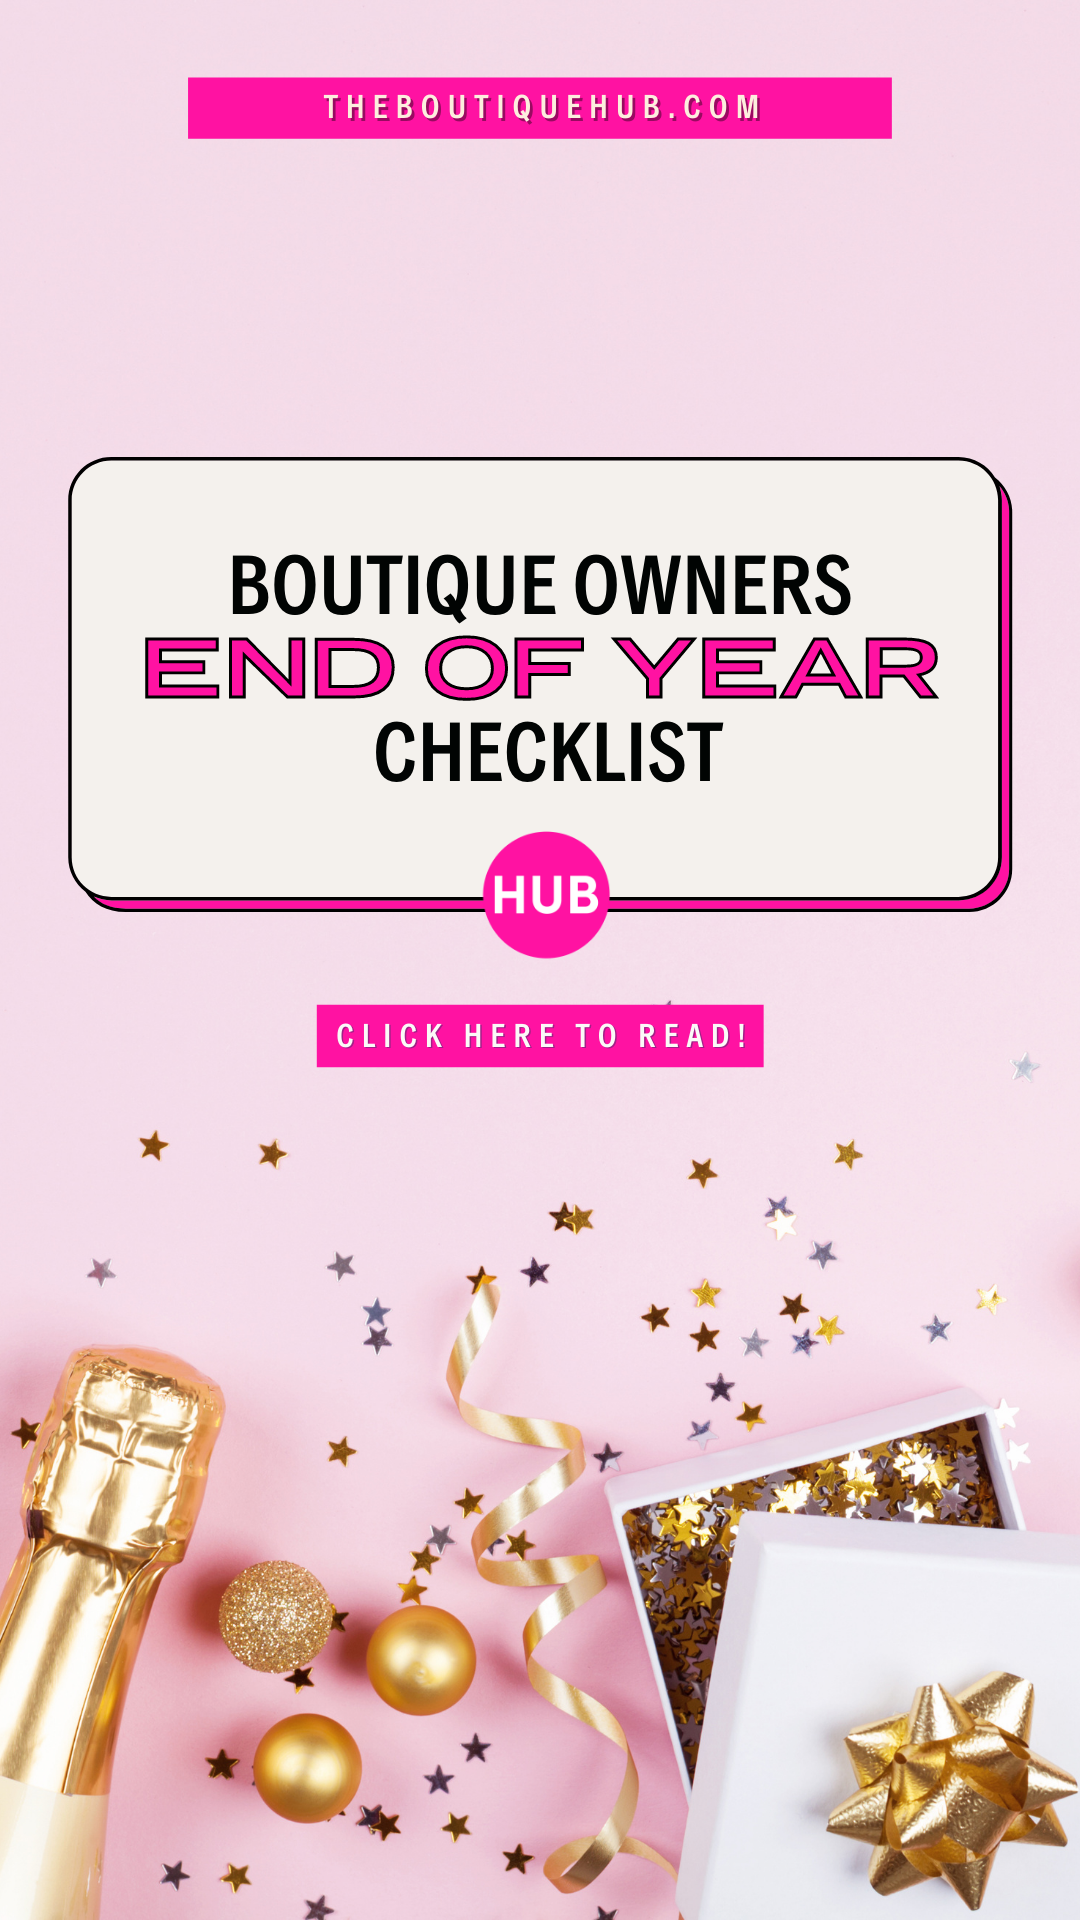 Boutique Owner's End of the Year Checklist